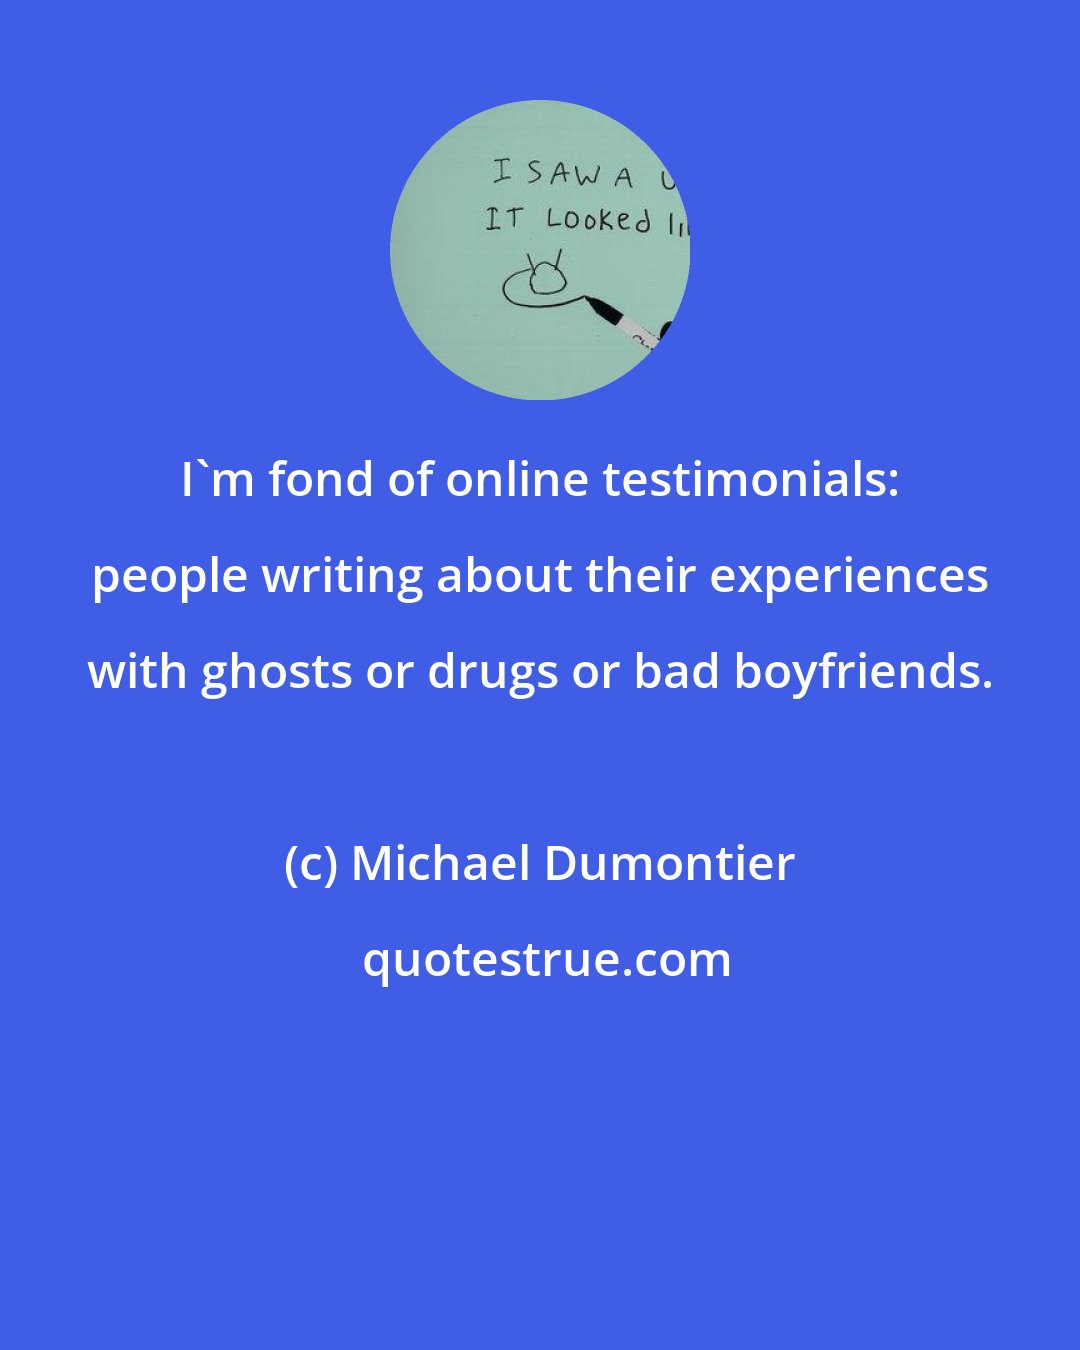 Michael Dumontier: I'm fond of online testimonials: people writing about their experiences with ghosts or drugs or bad boyfriends.